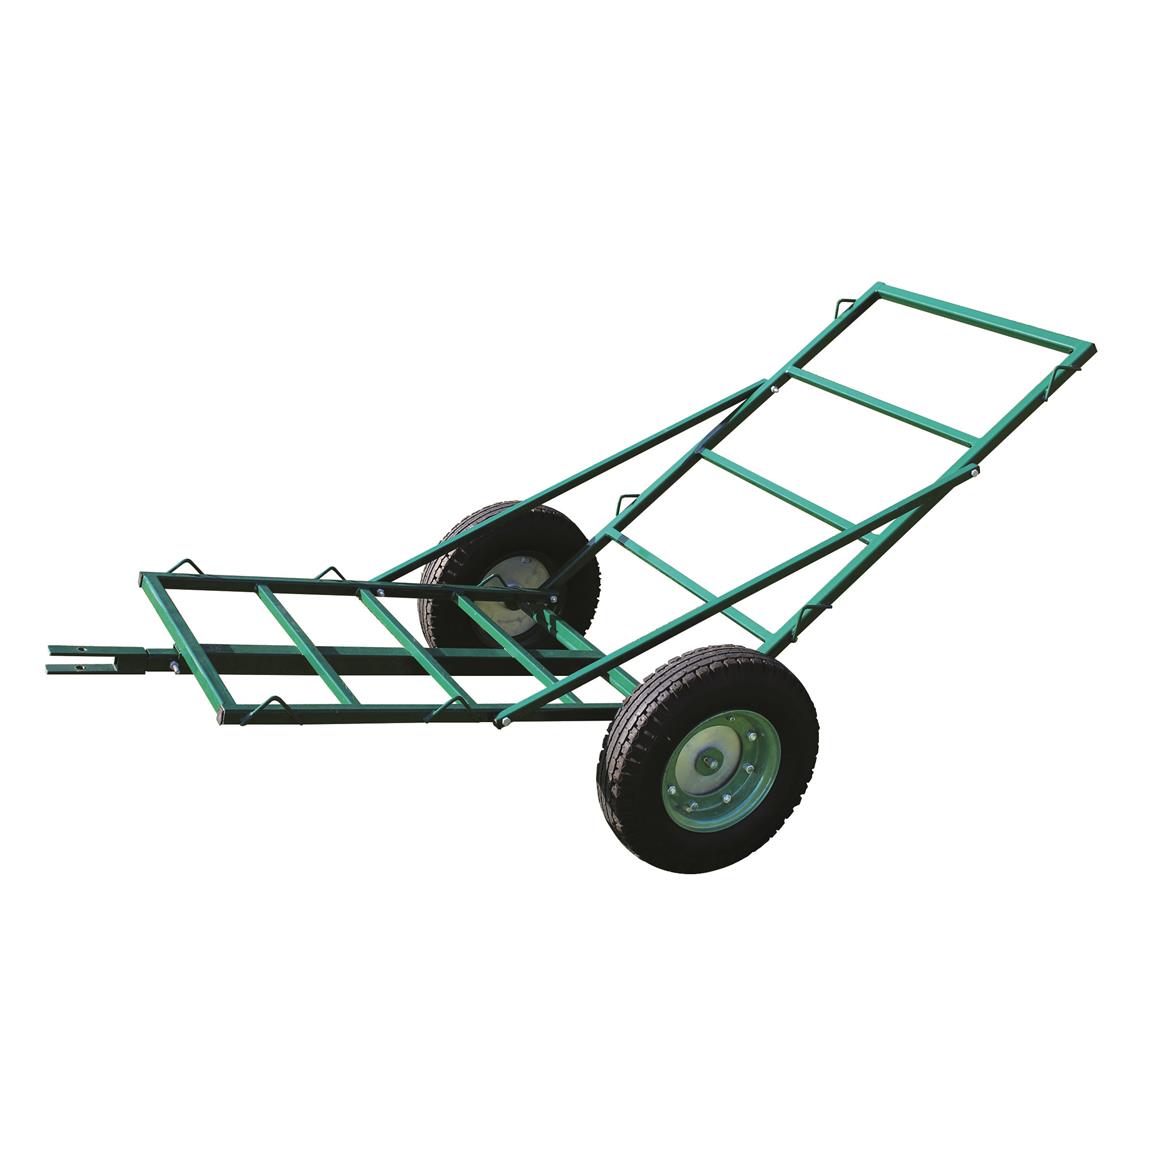 Southern Outdoor Technologies The Beast Game Cart, Green